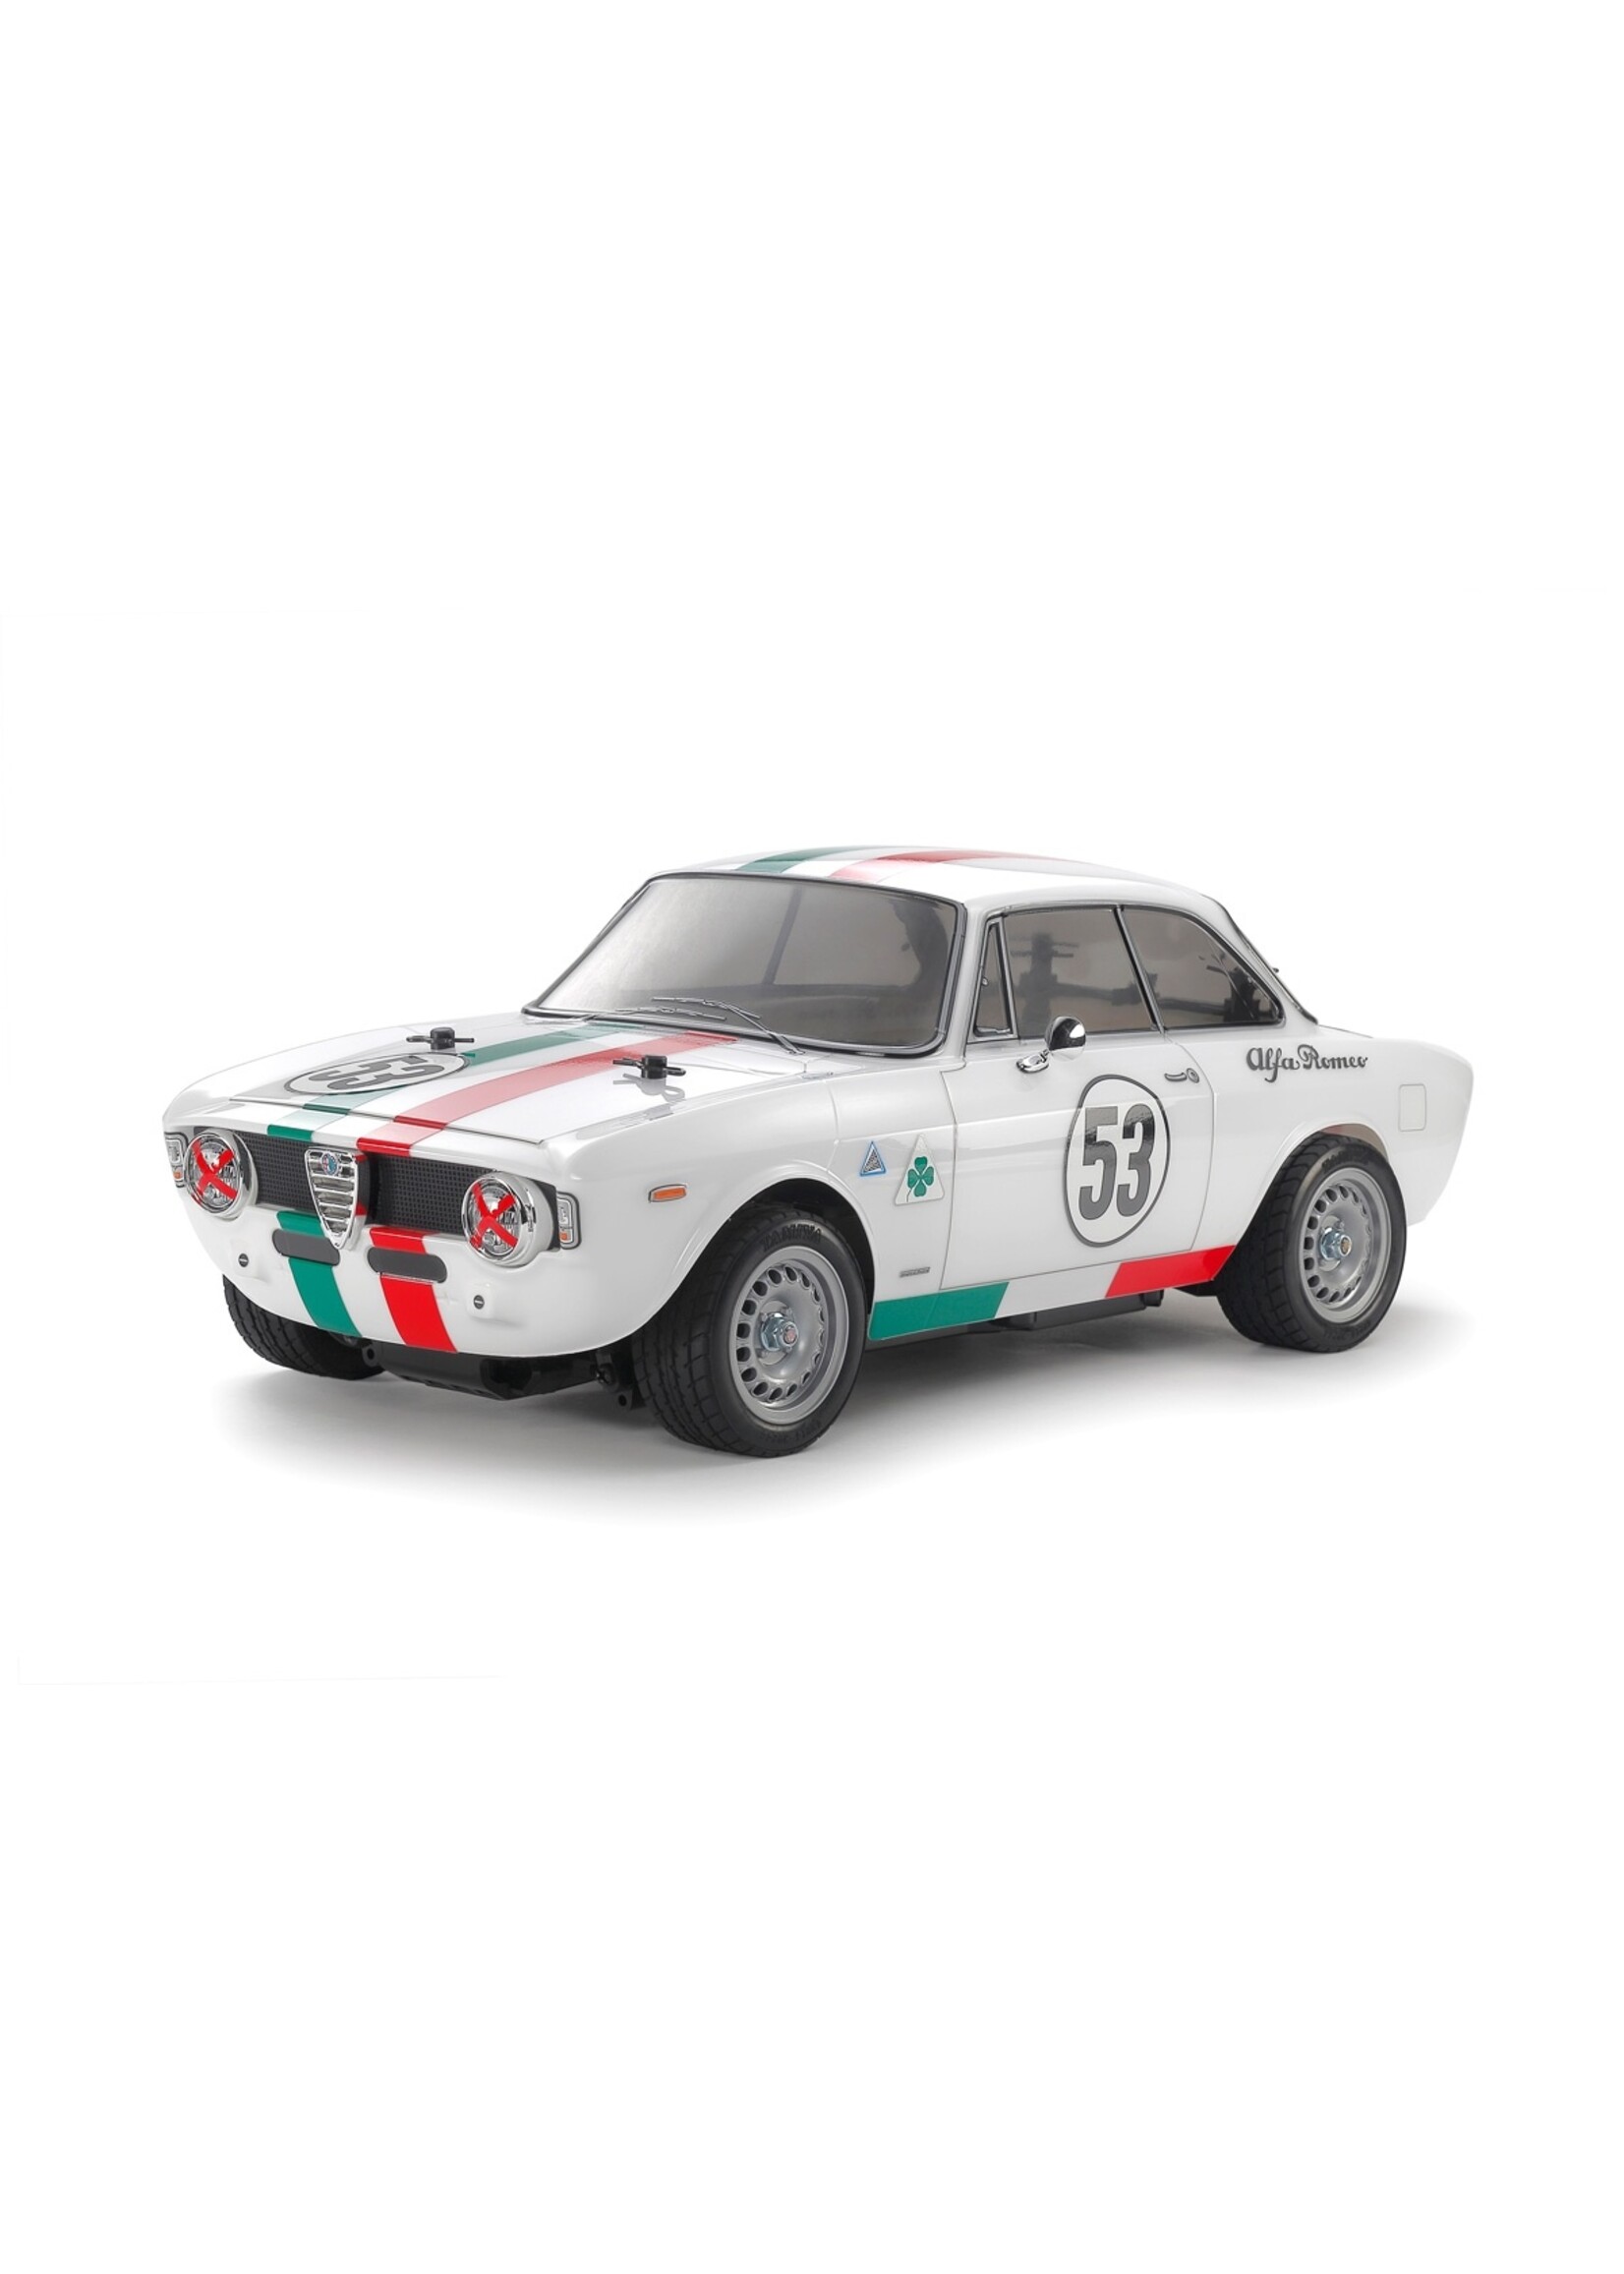 Parts for sale Archives - Alfa Romeo Owners Club